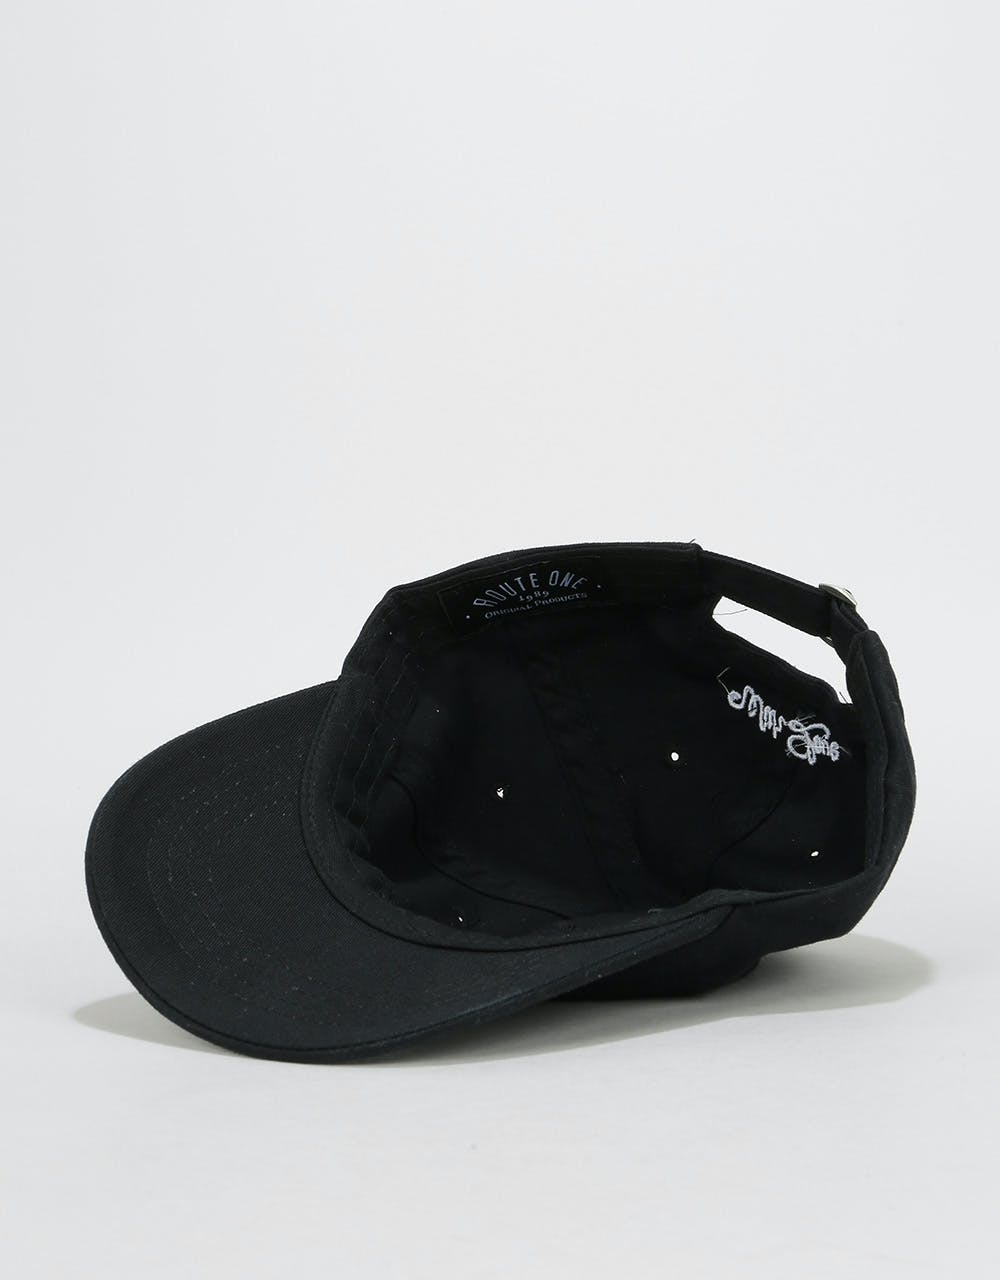 Route One With Love Cap - Black